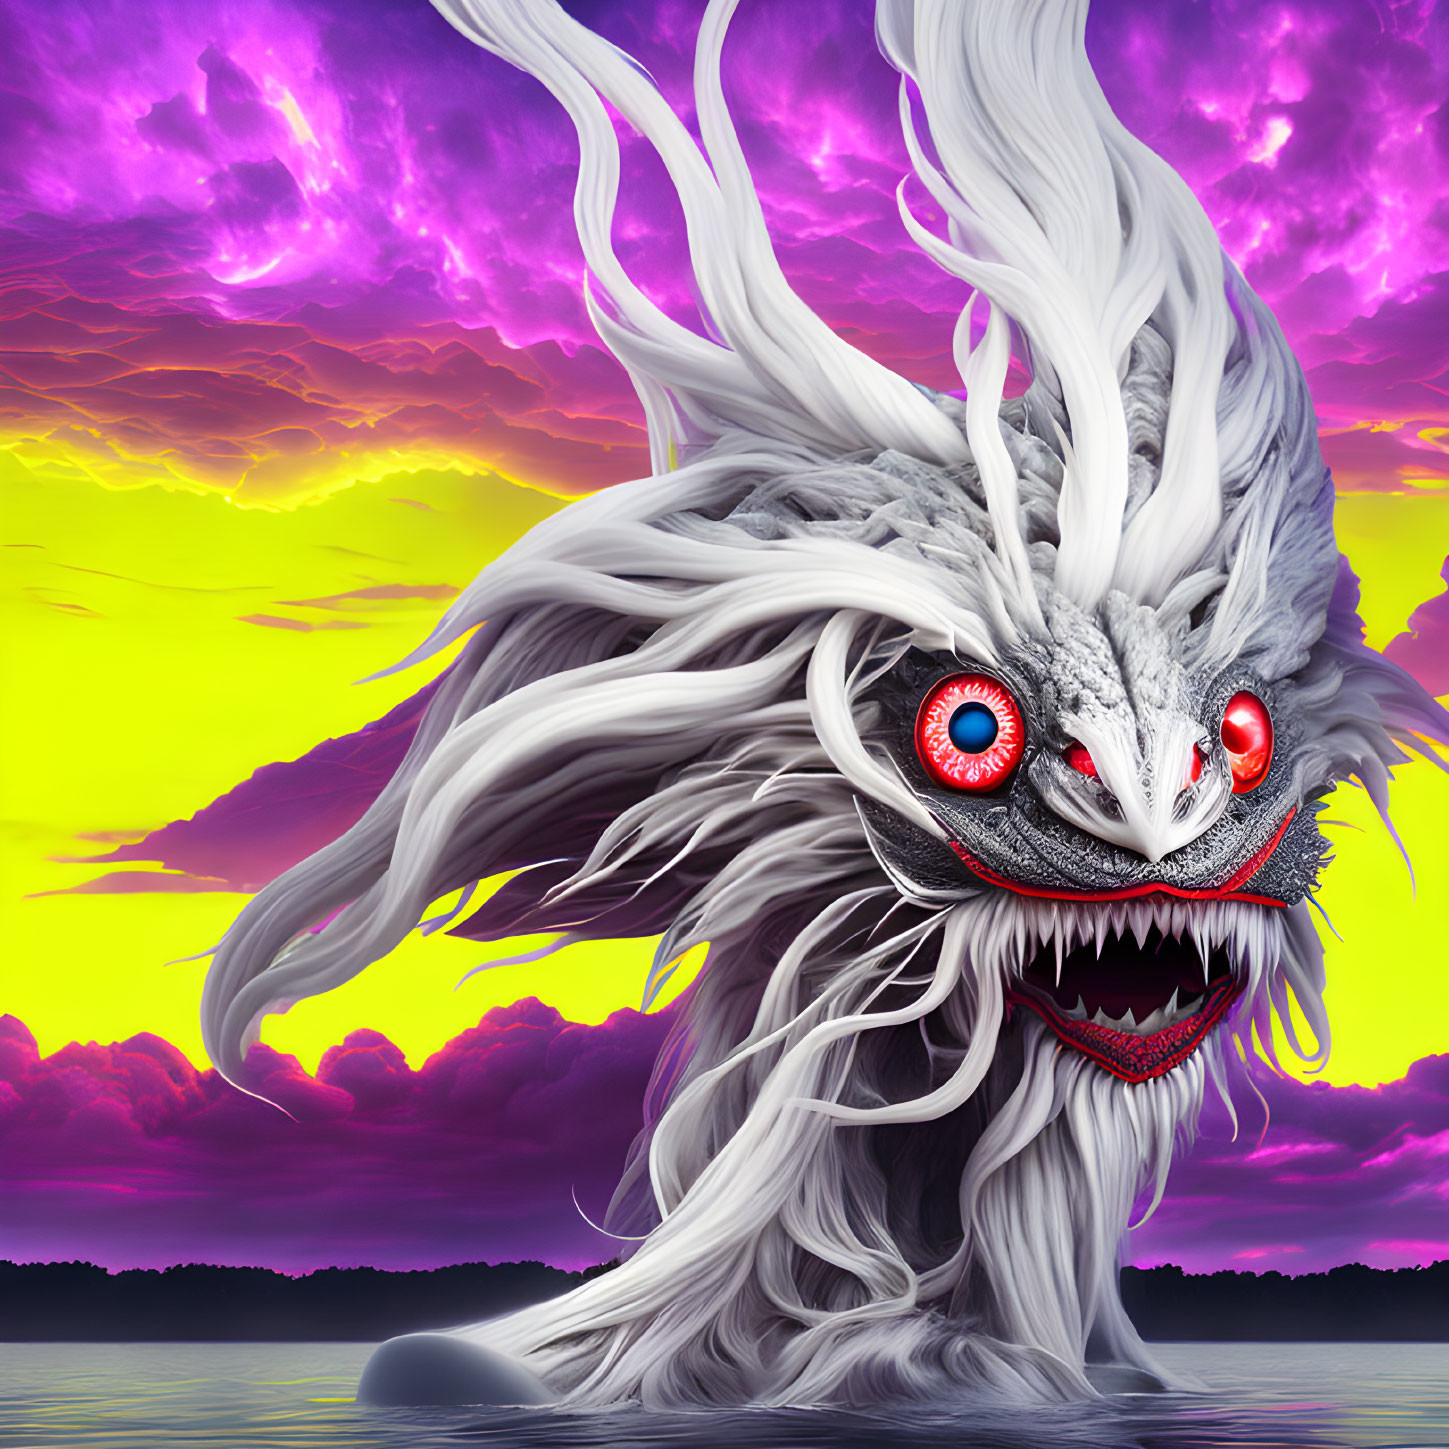 White Dragon with Red Eyes in Purple Sunset Sky